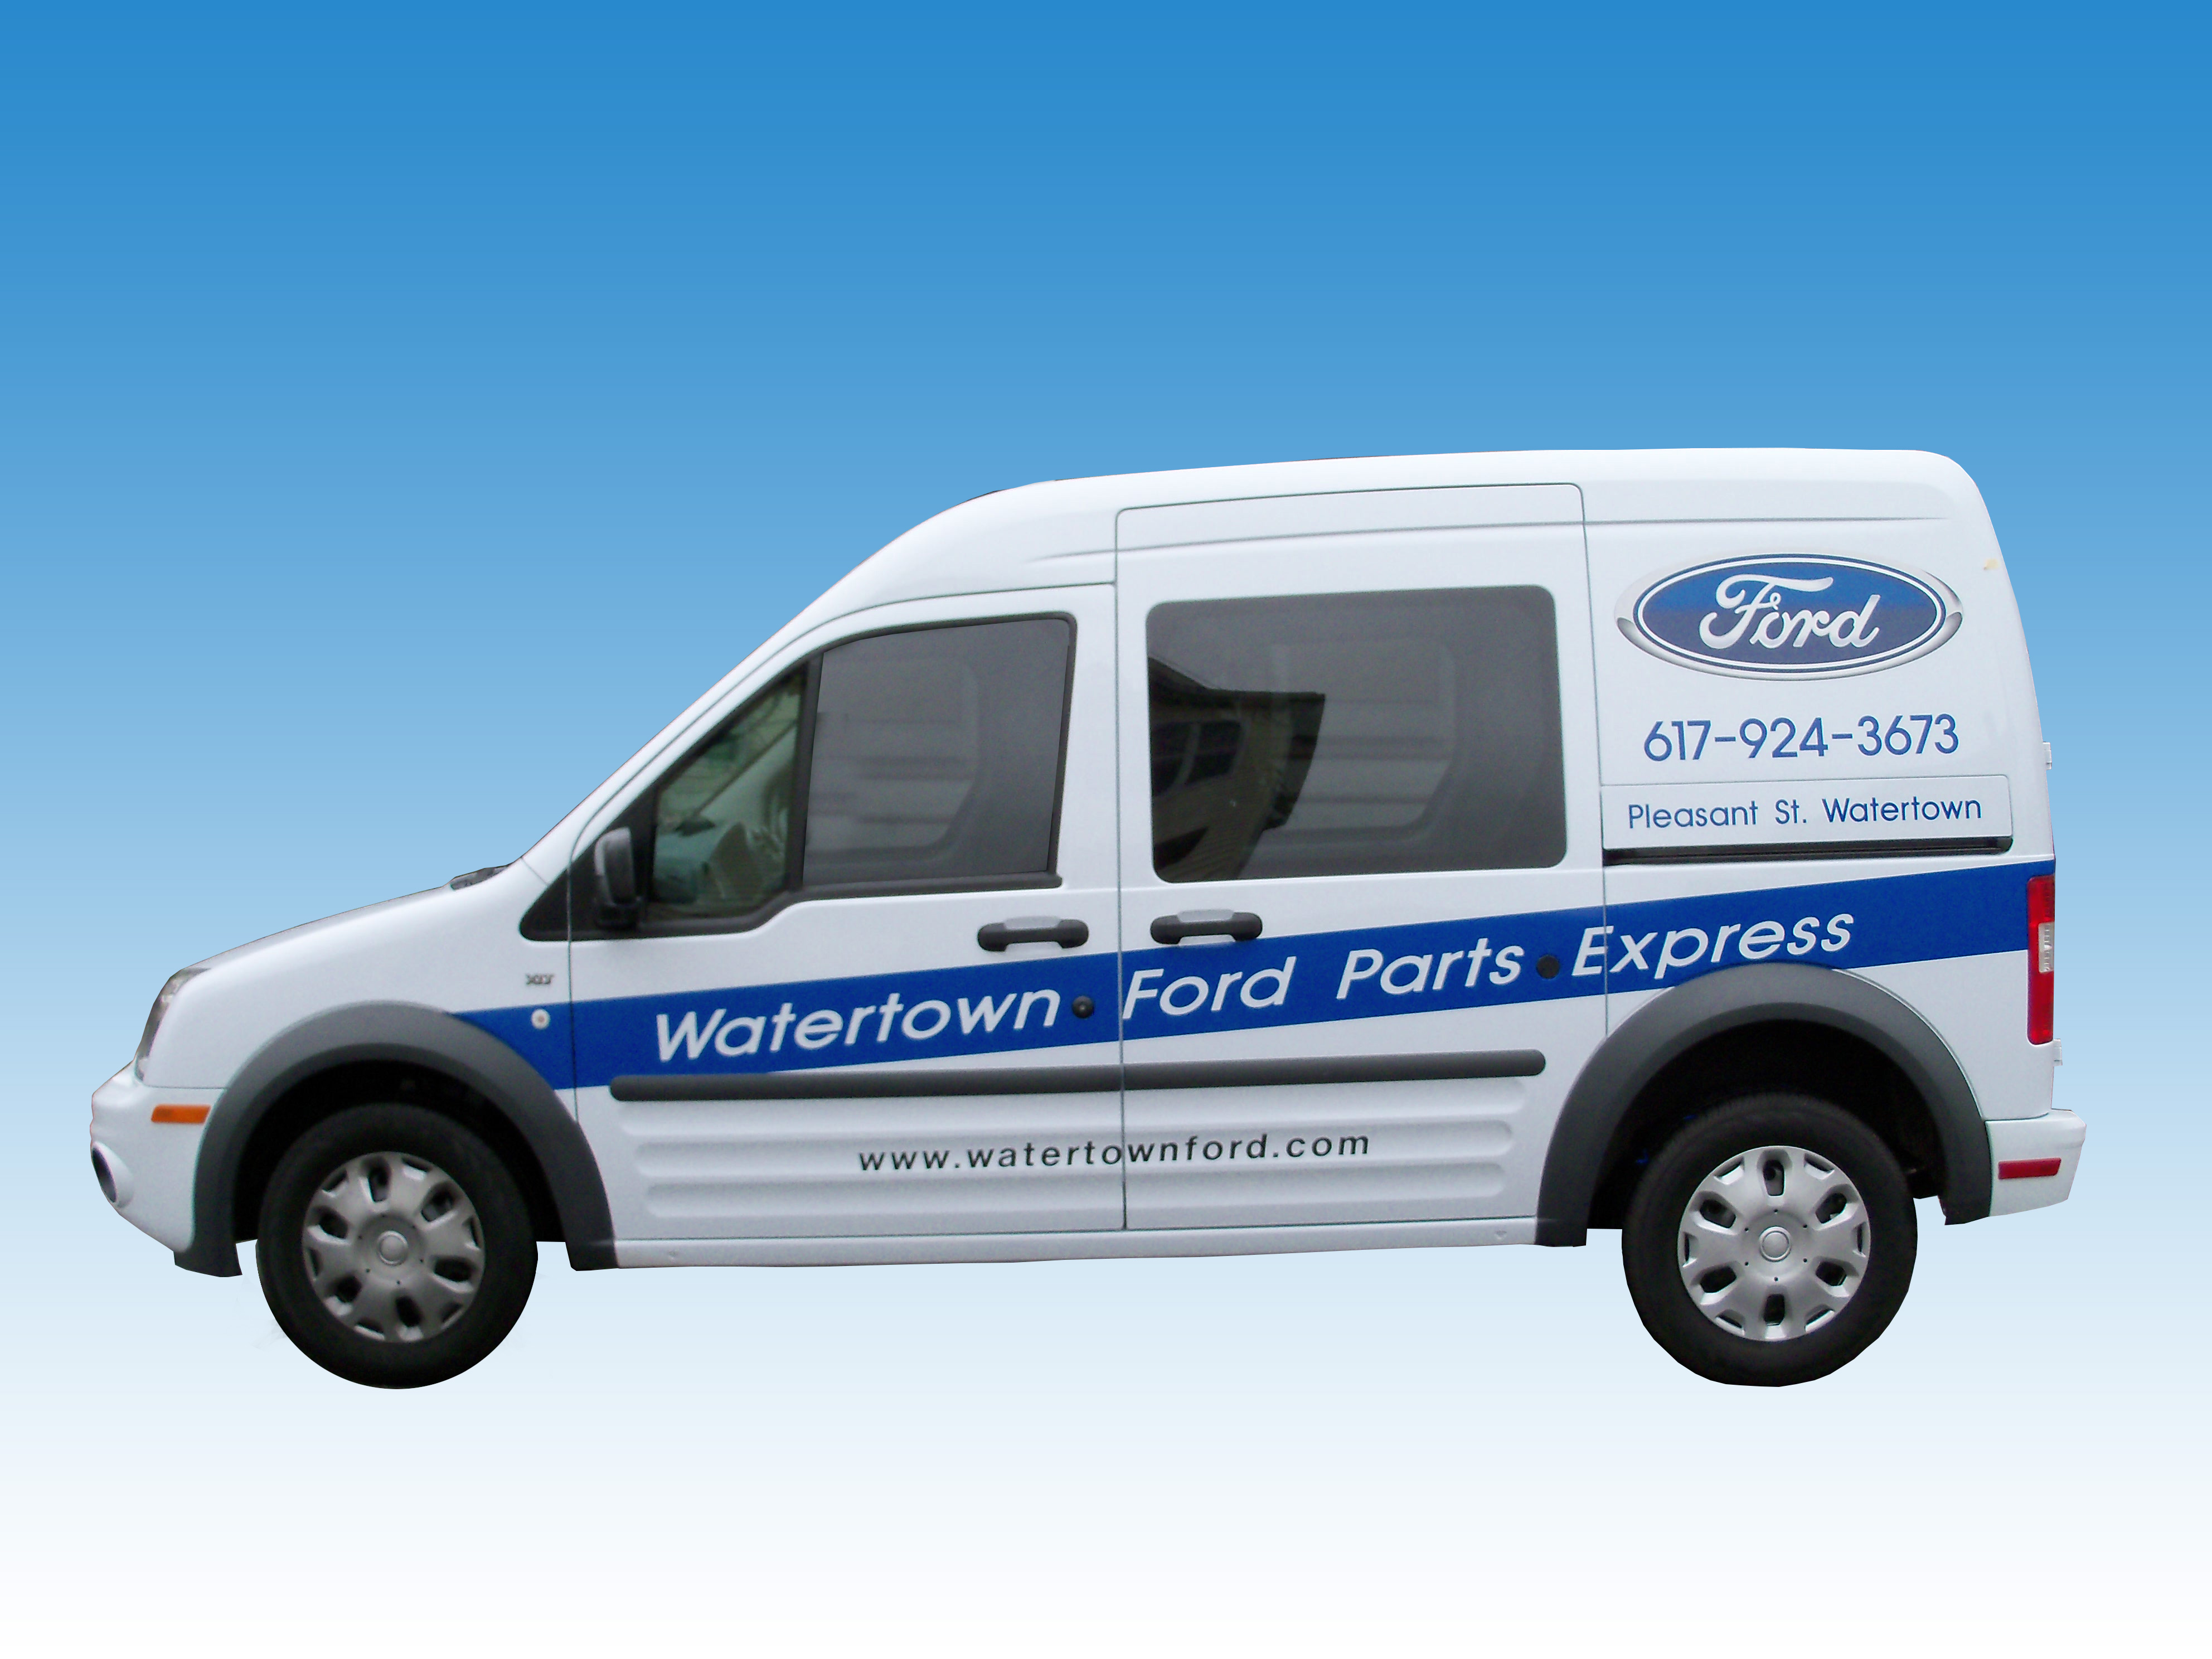 Watertown Ford Parts Express